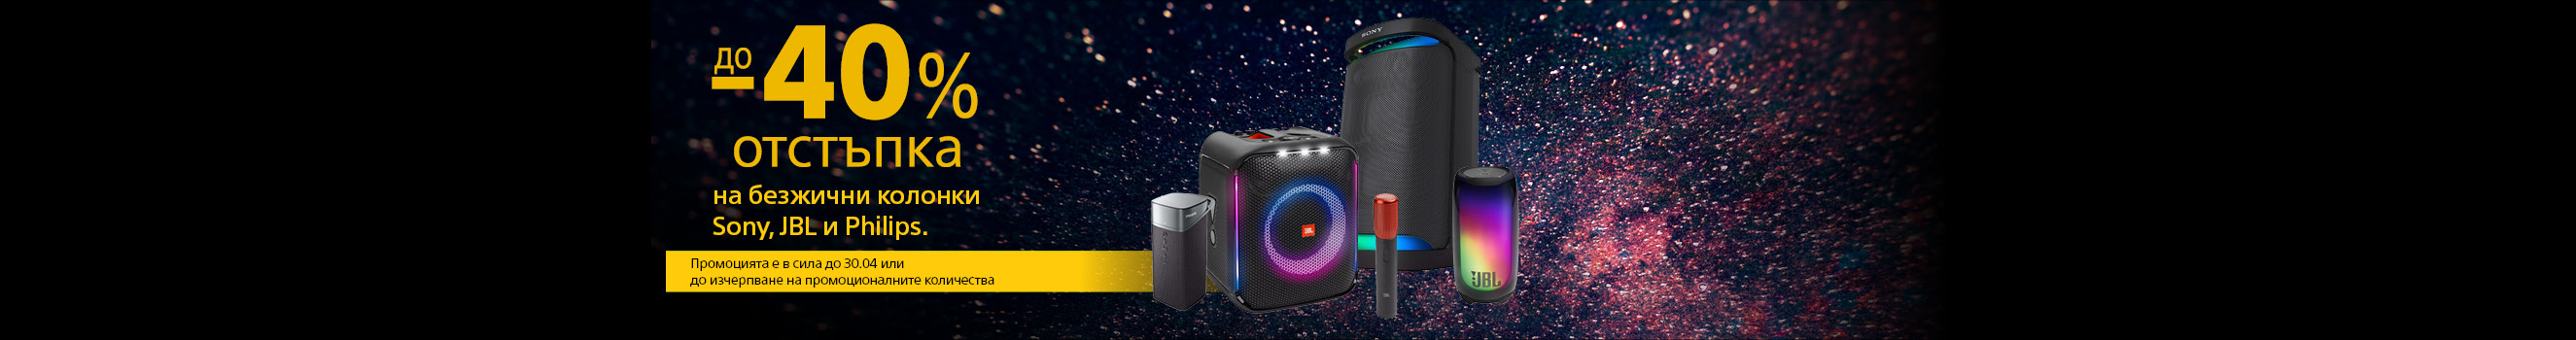  Up to -40% discount for bluetooth and party speakers Sony, Philips and JBL until 30.04 